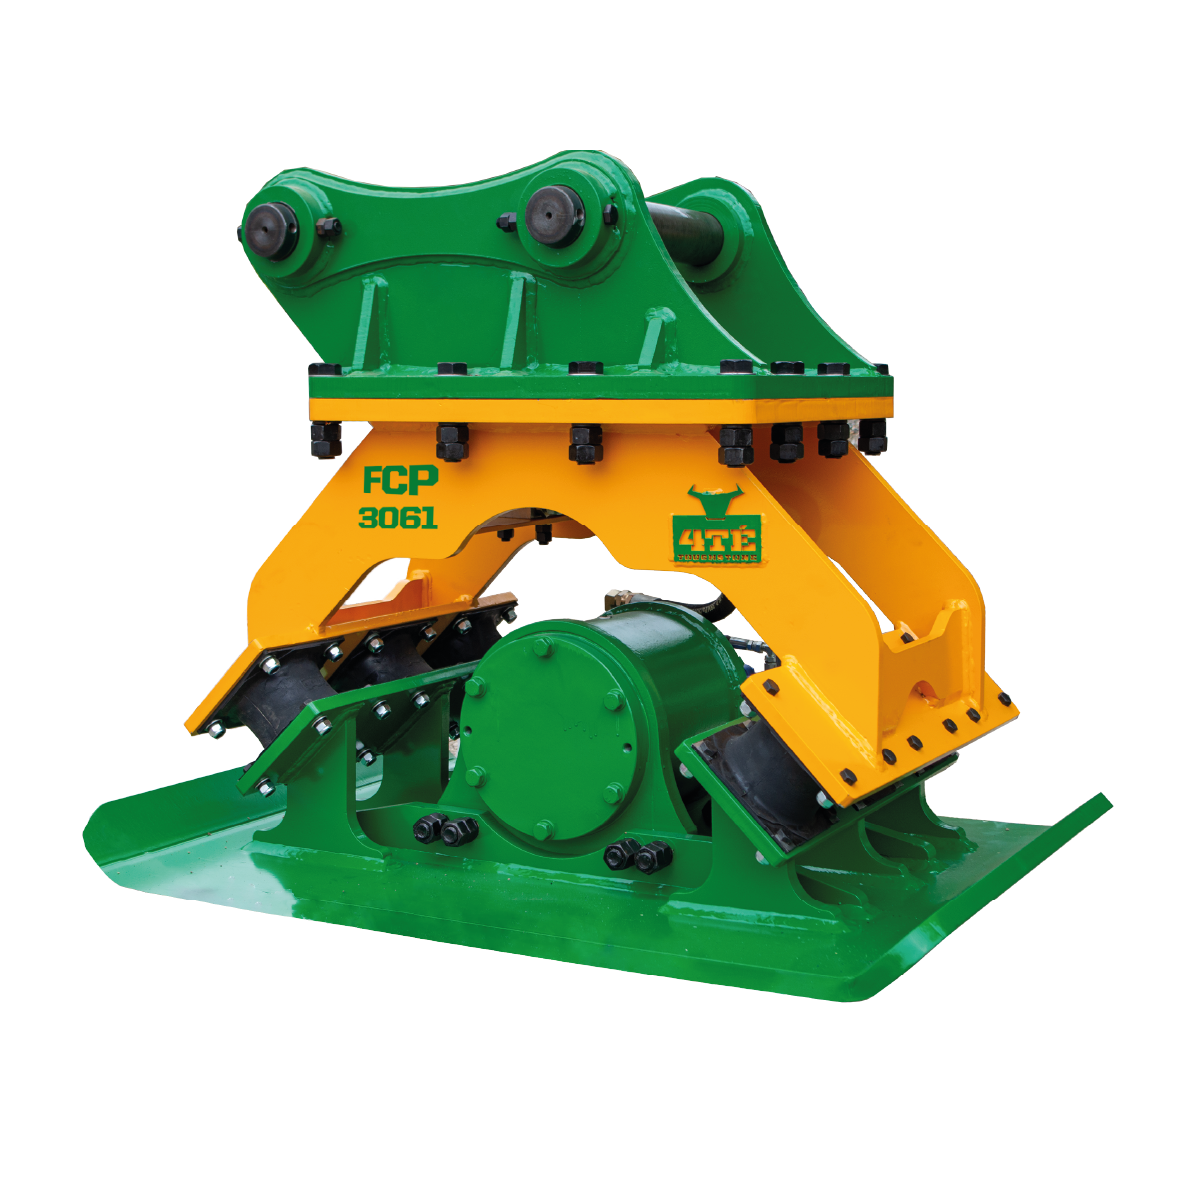 FCP-3061 Compactor Plate